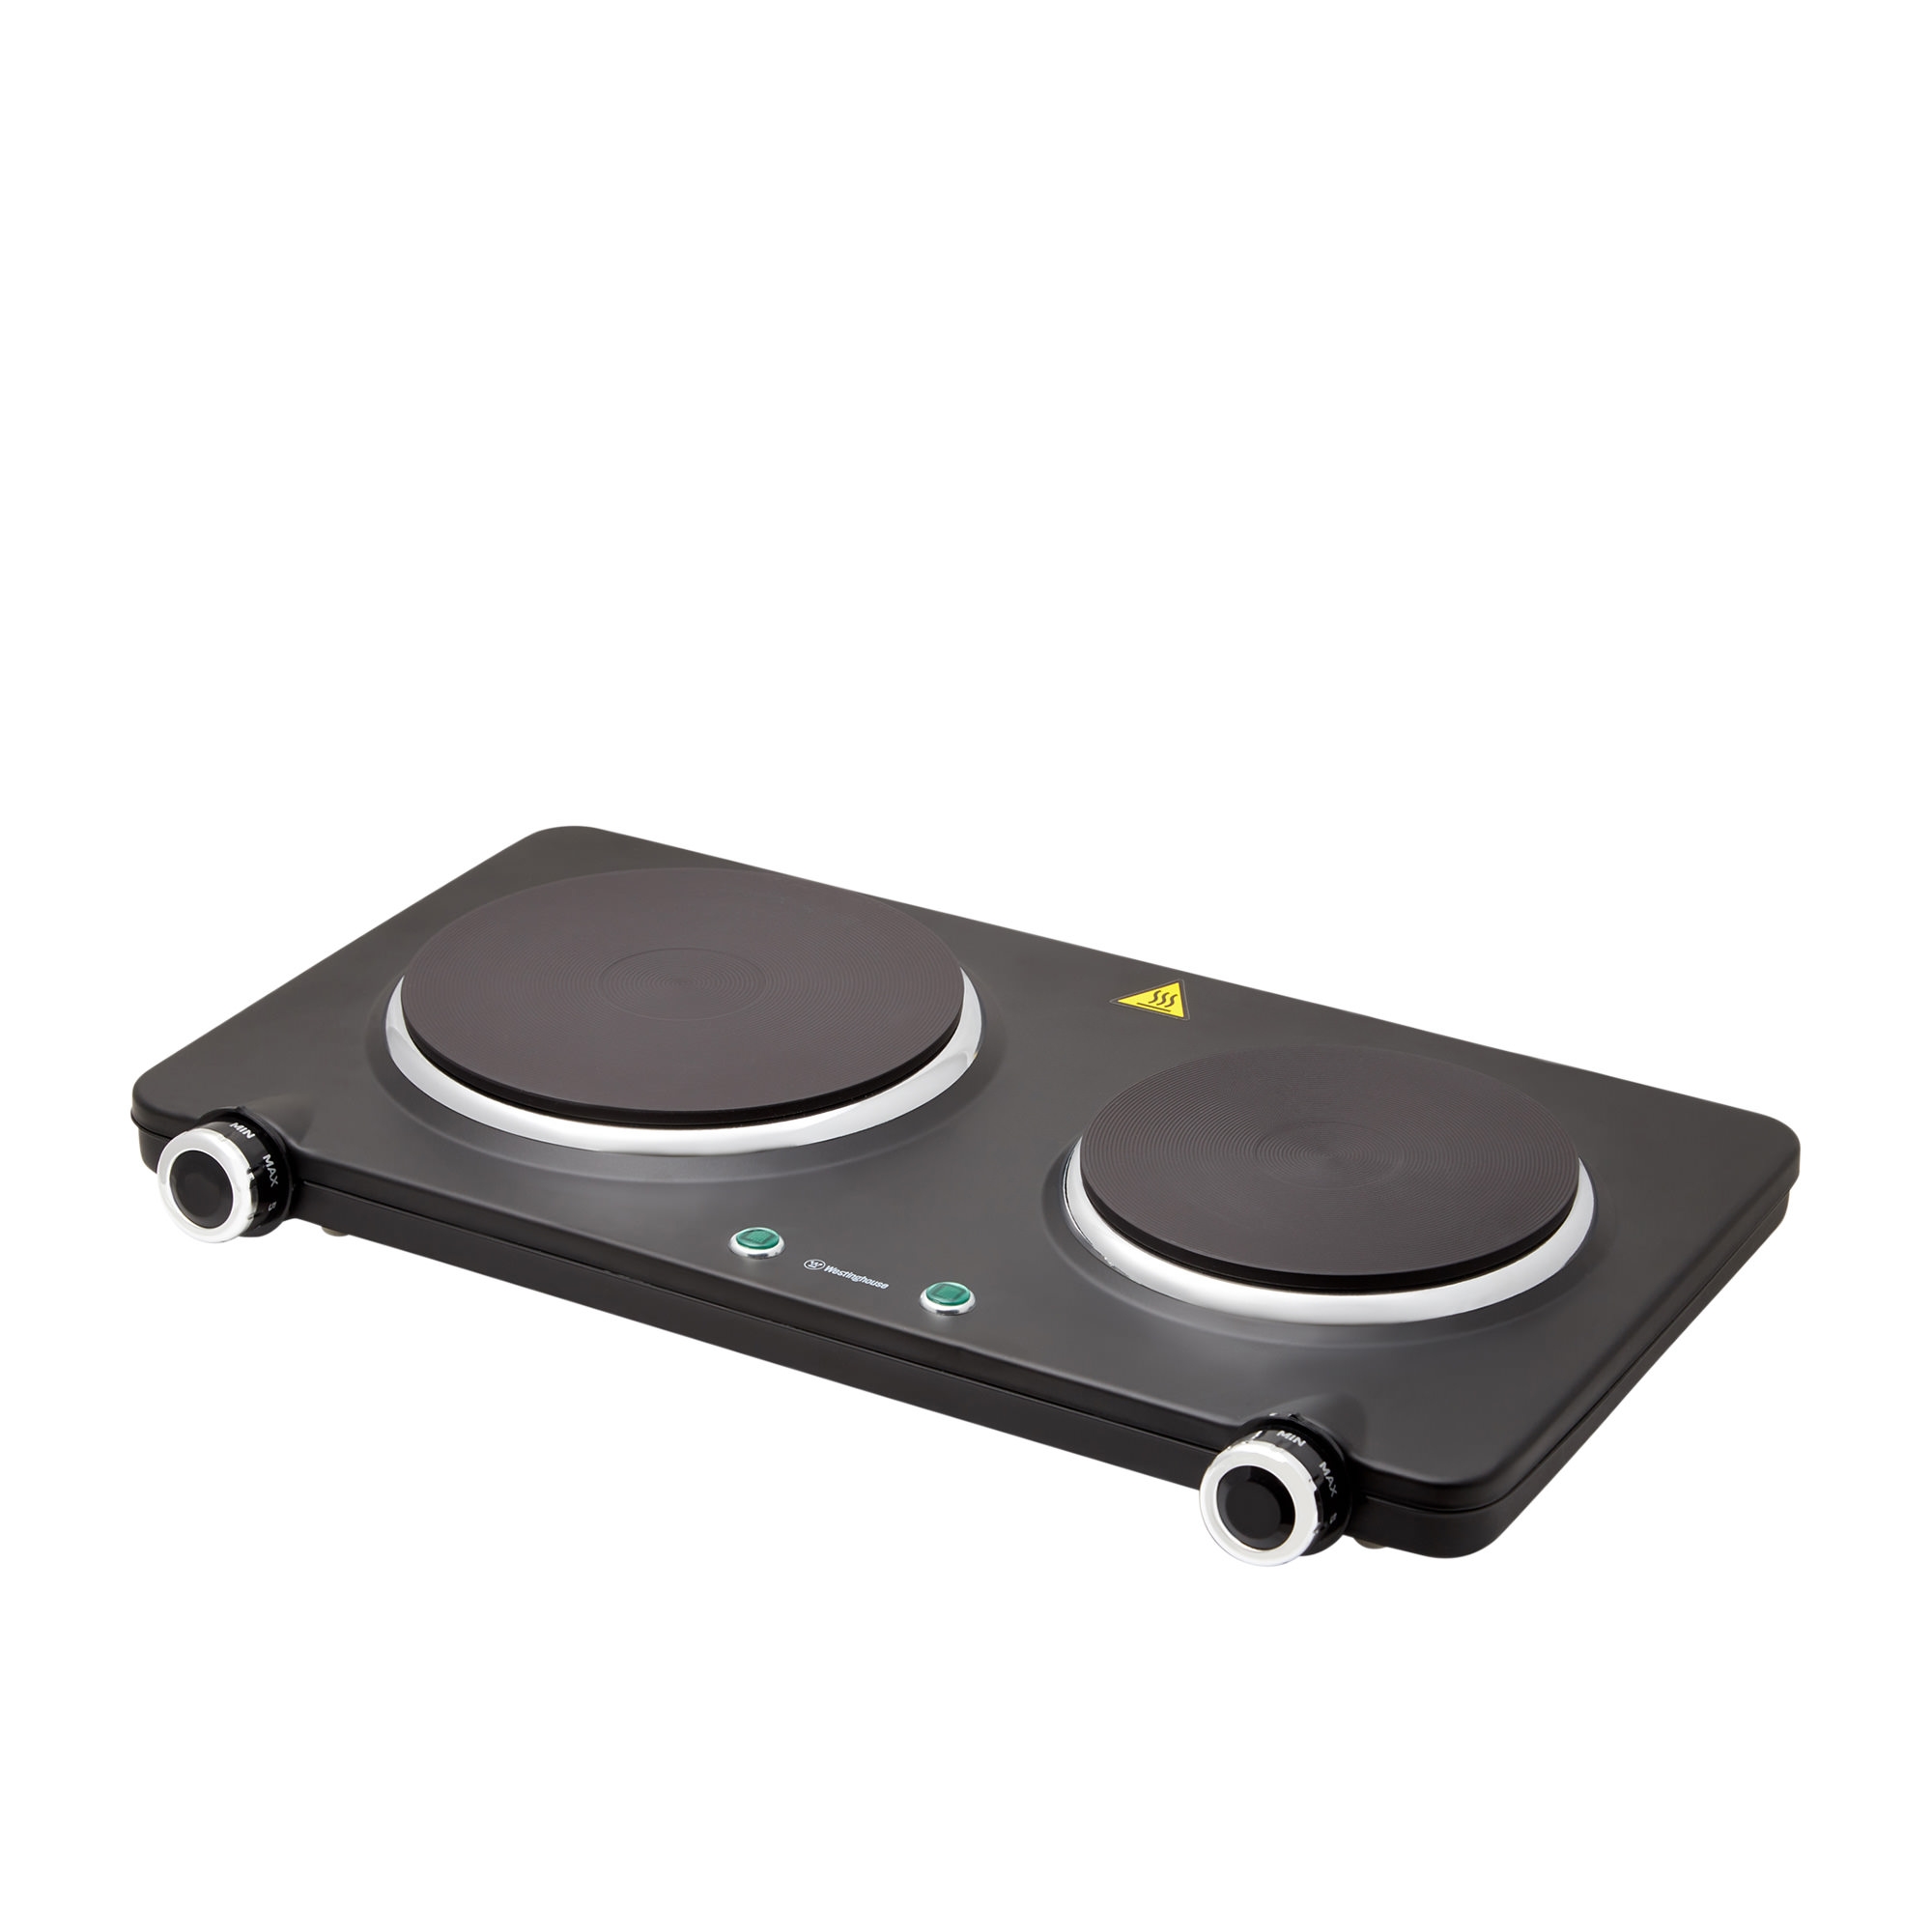 Westinghouse Double Electric Hotplate Black Image 1